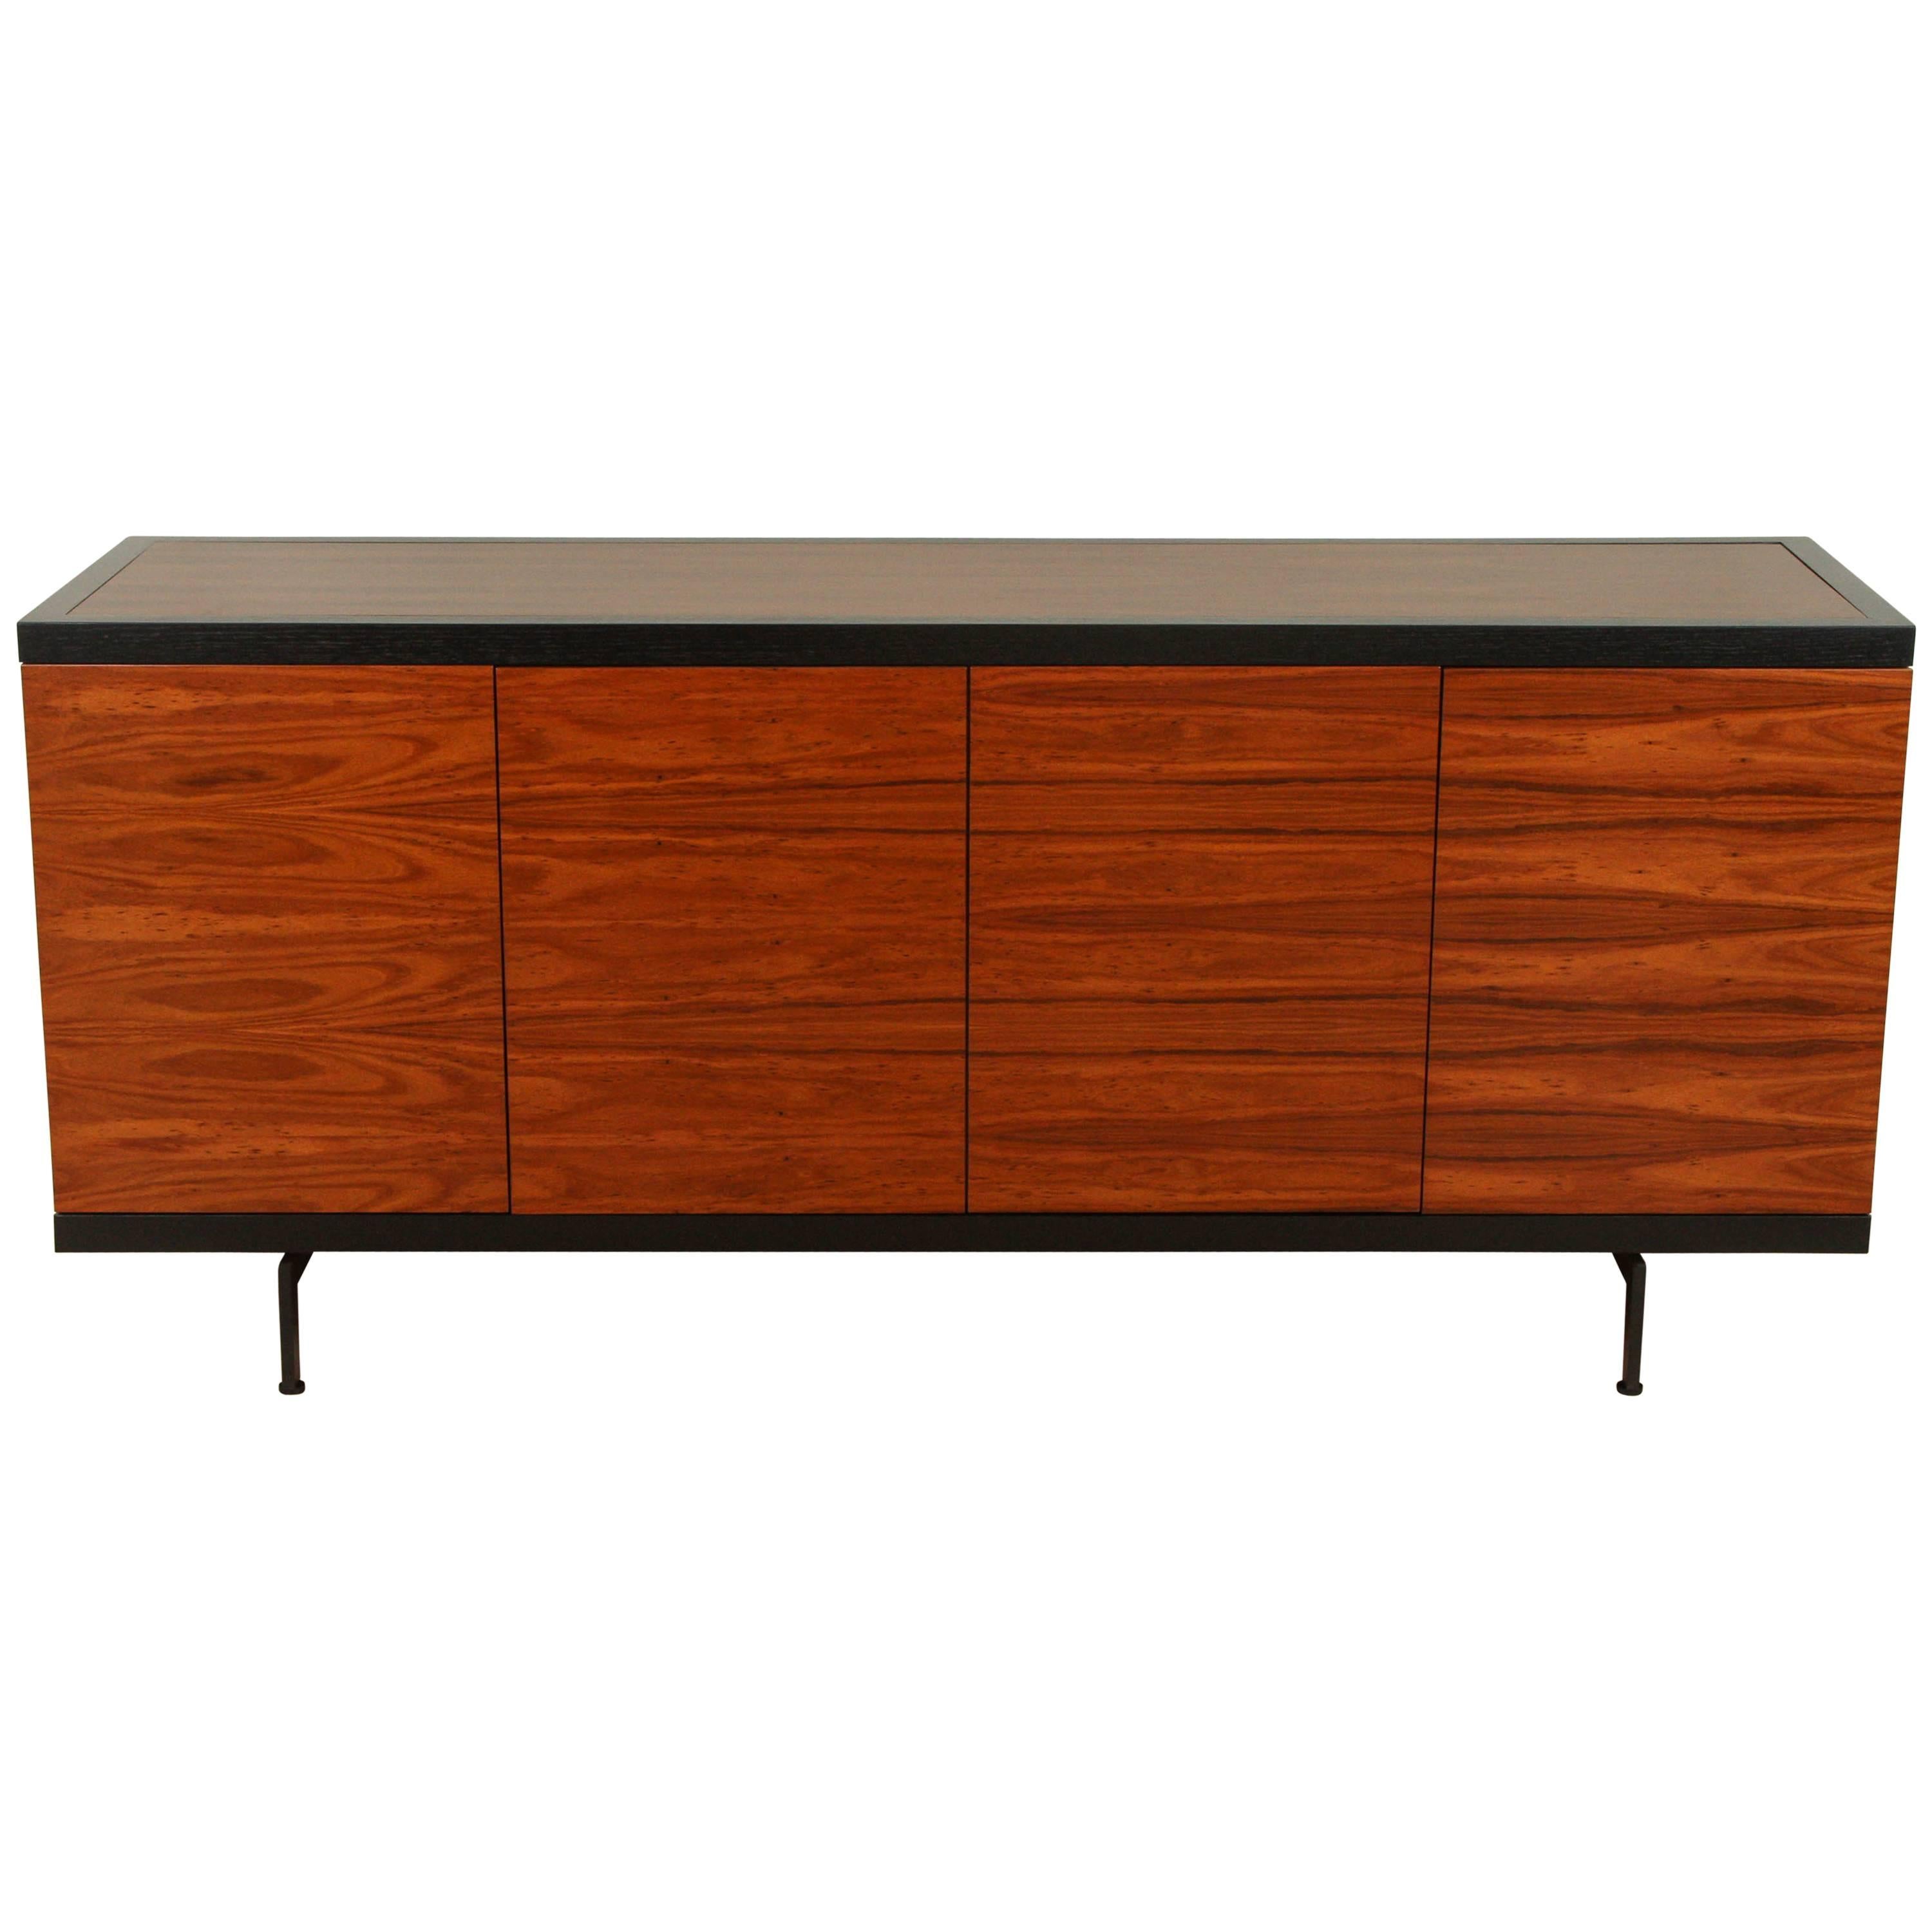 Four-Door Rosewood Dimas Cabinet by Lawson-Fenning